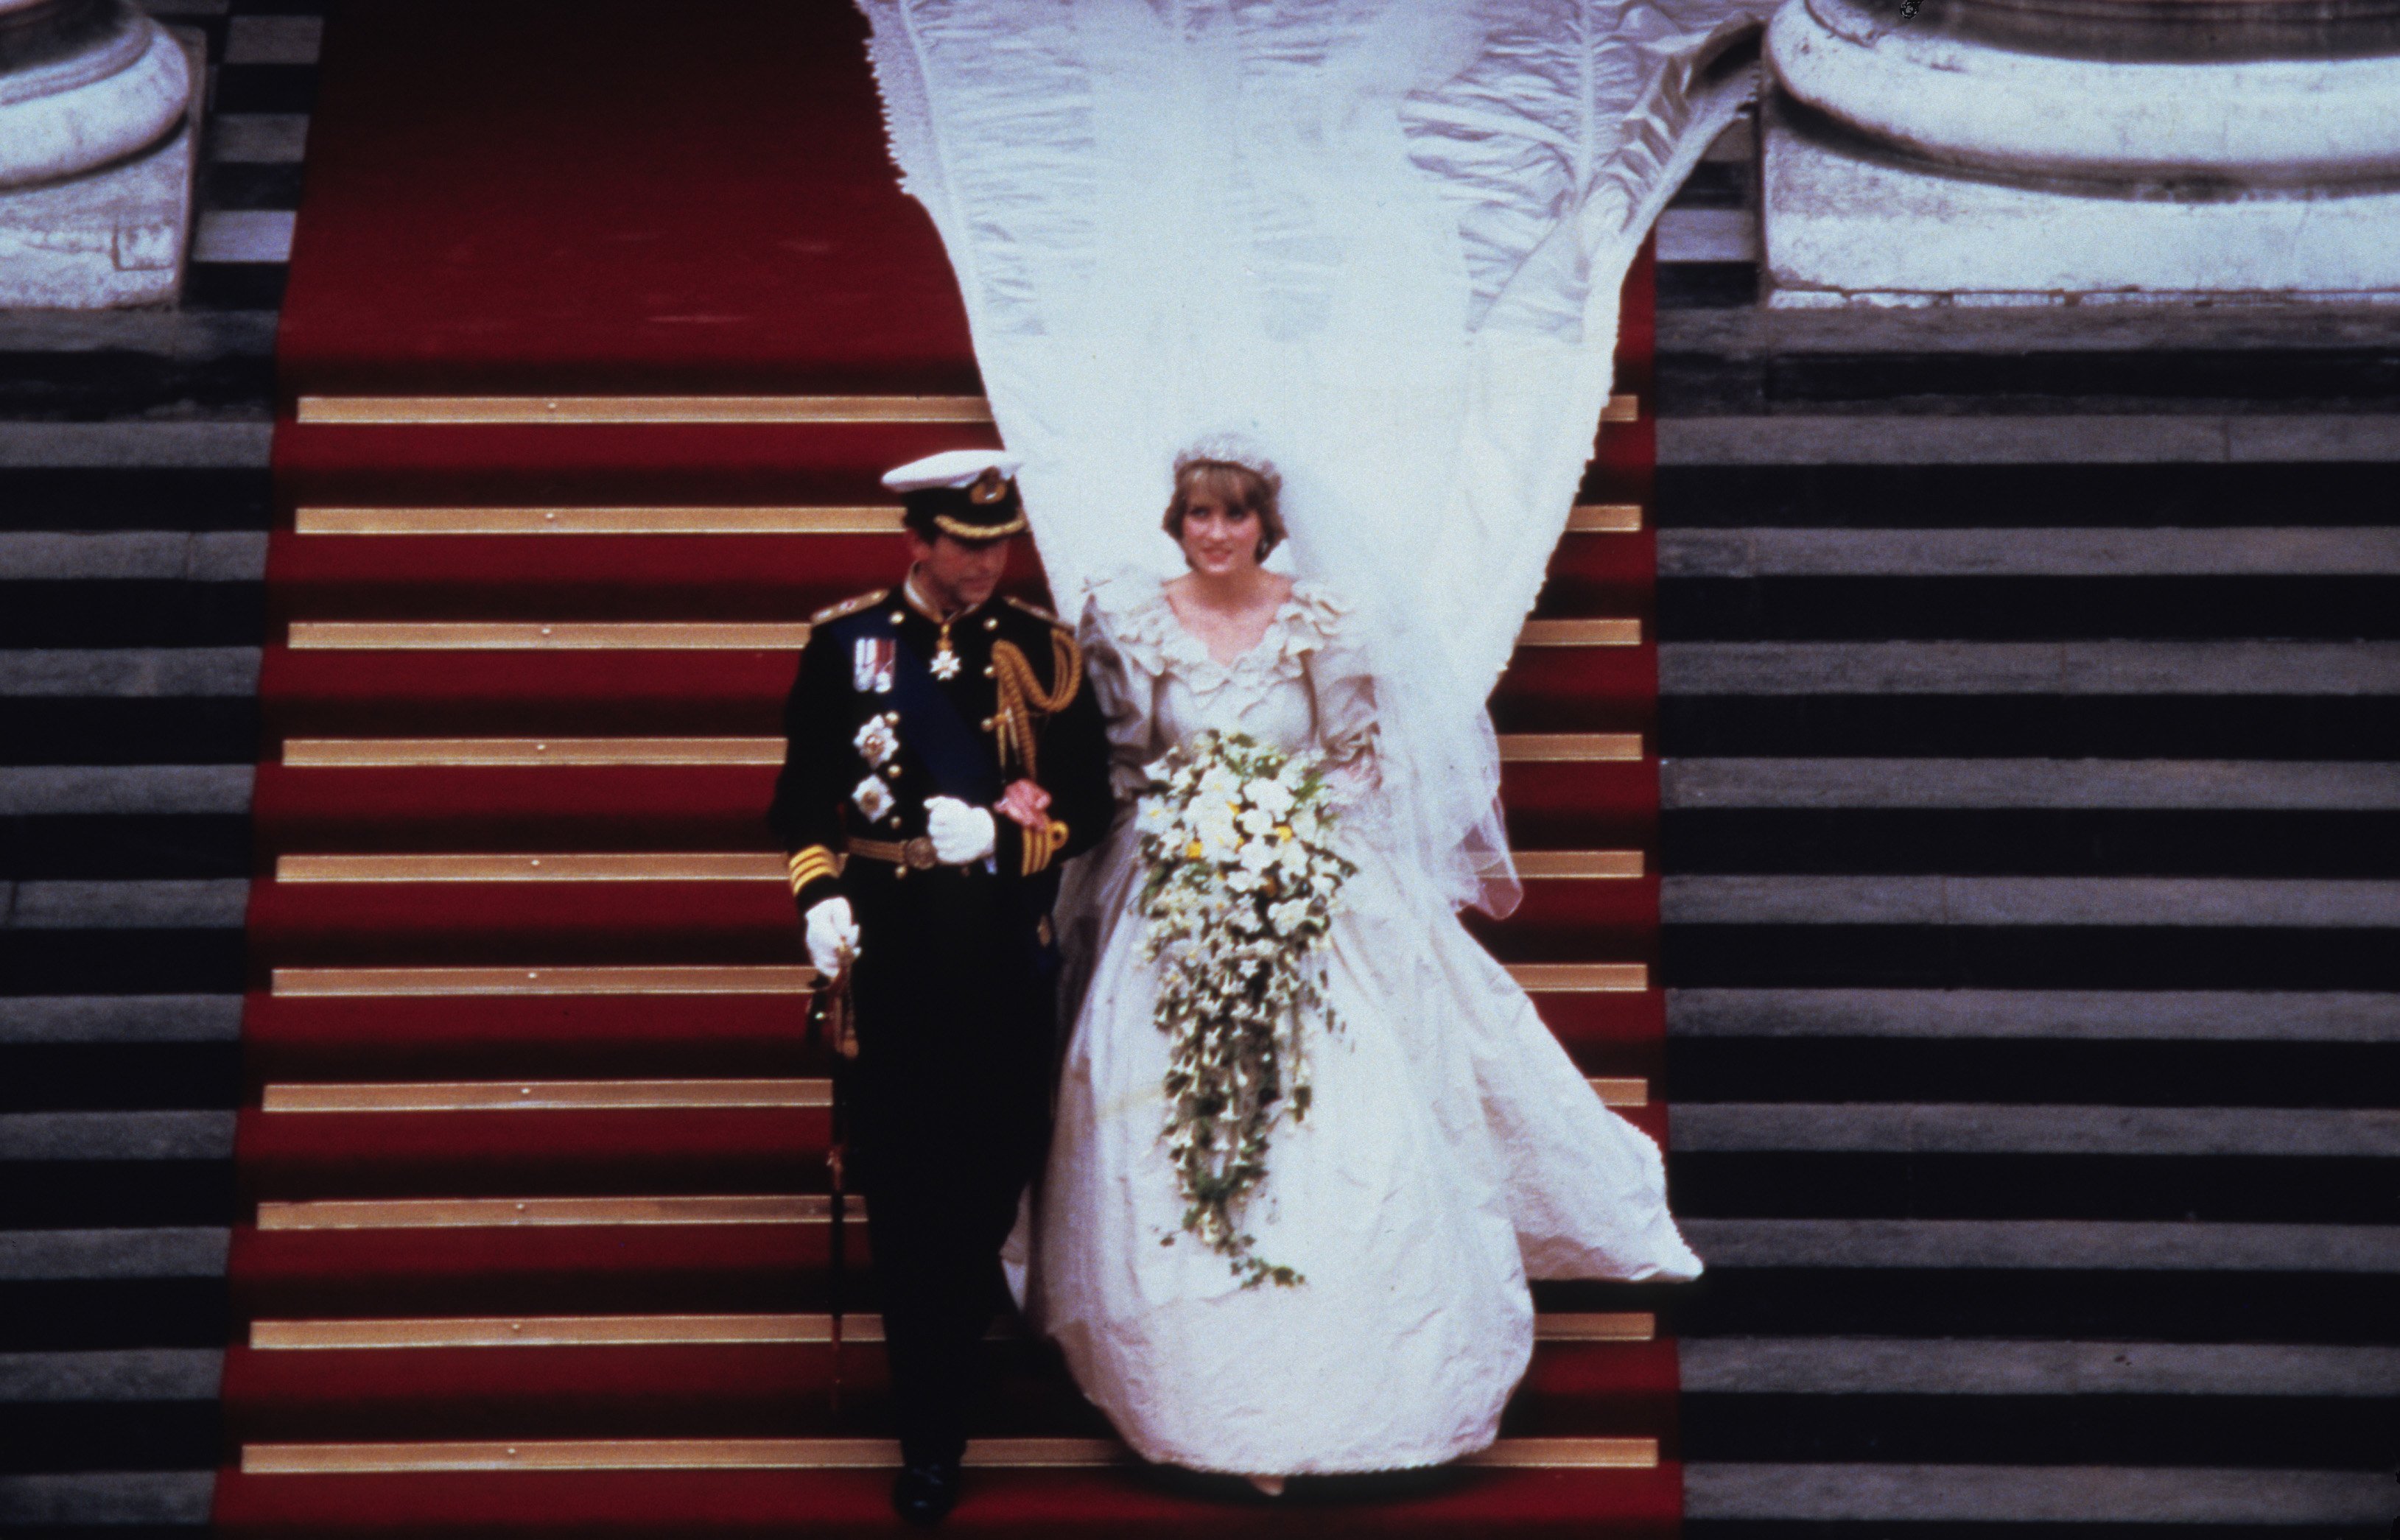 Prince Charles,  and Diana,  wearing a wedding dress designed by David and Elizabeth Emanuel and the Spencer family Tiara, leave St. Paul's Cathedral following their wedding on July 29, 1981 in London, England. | Source: Getty Images